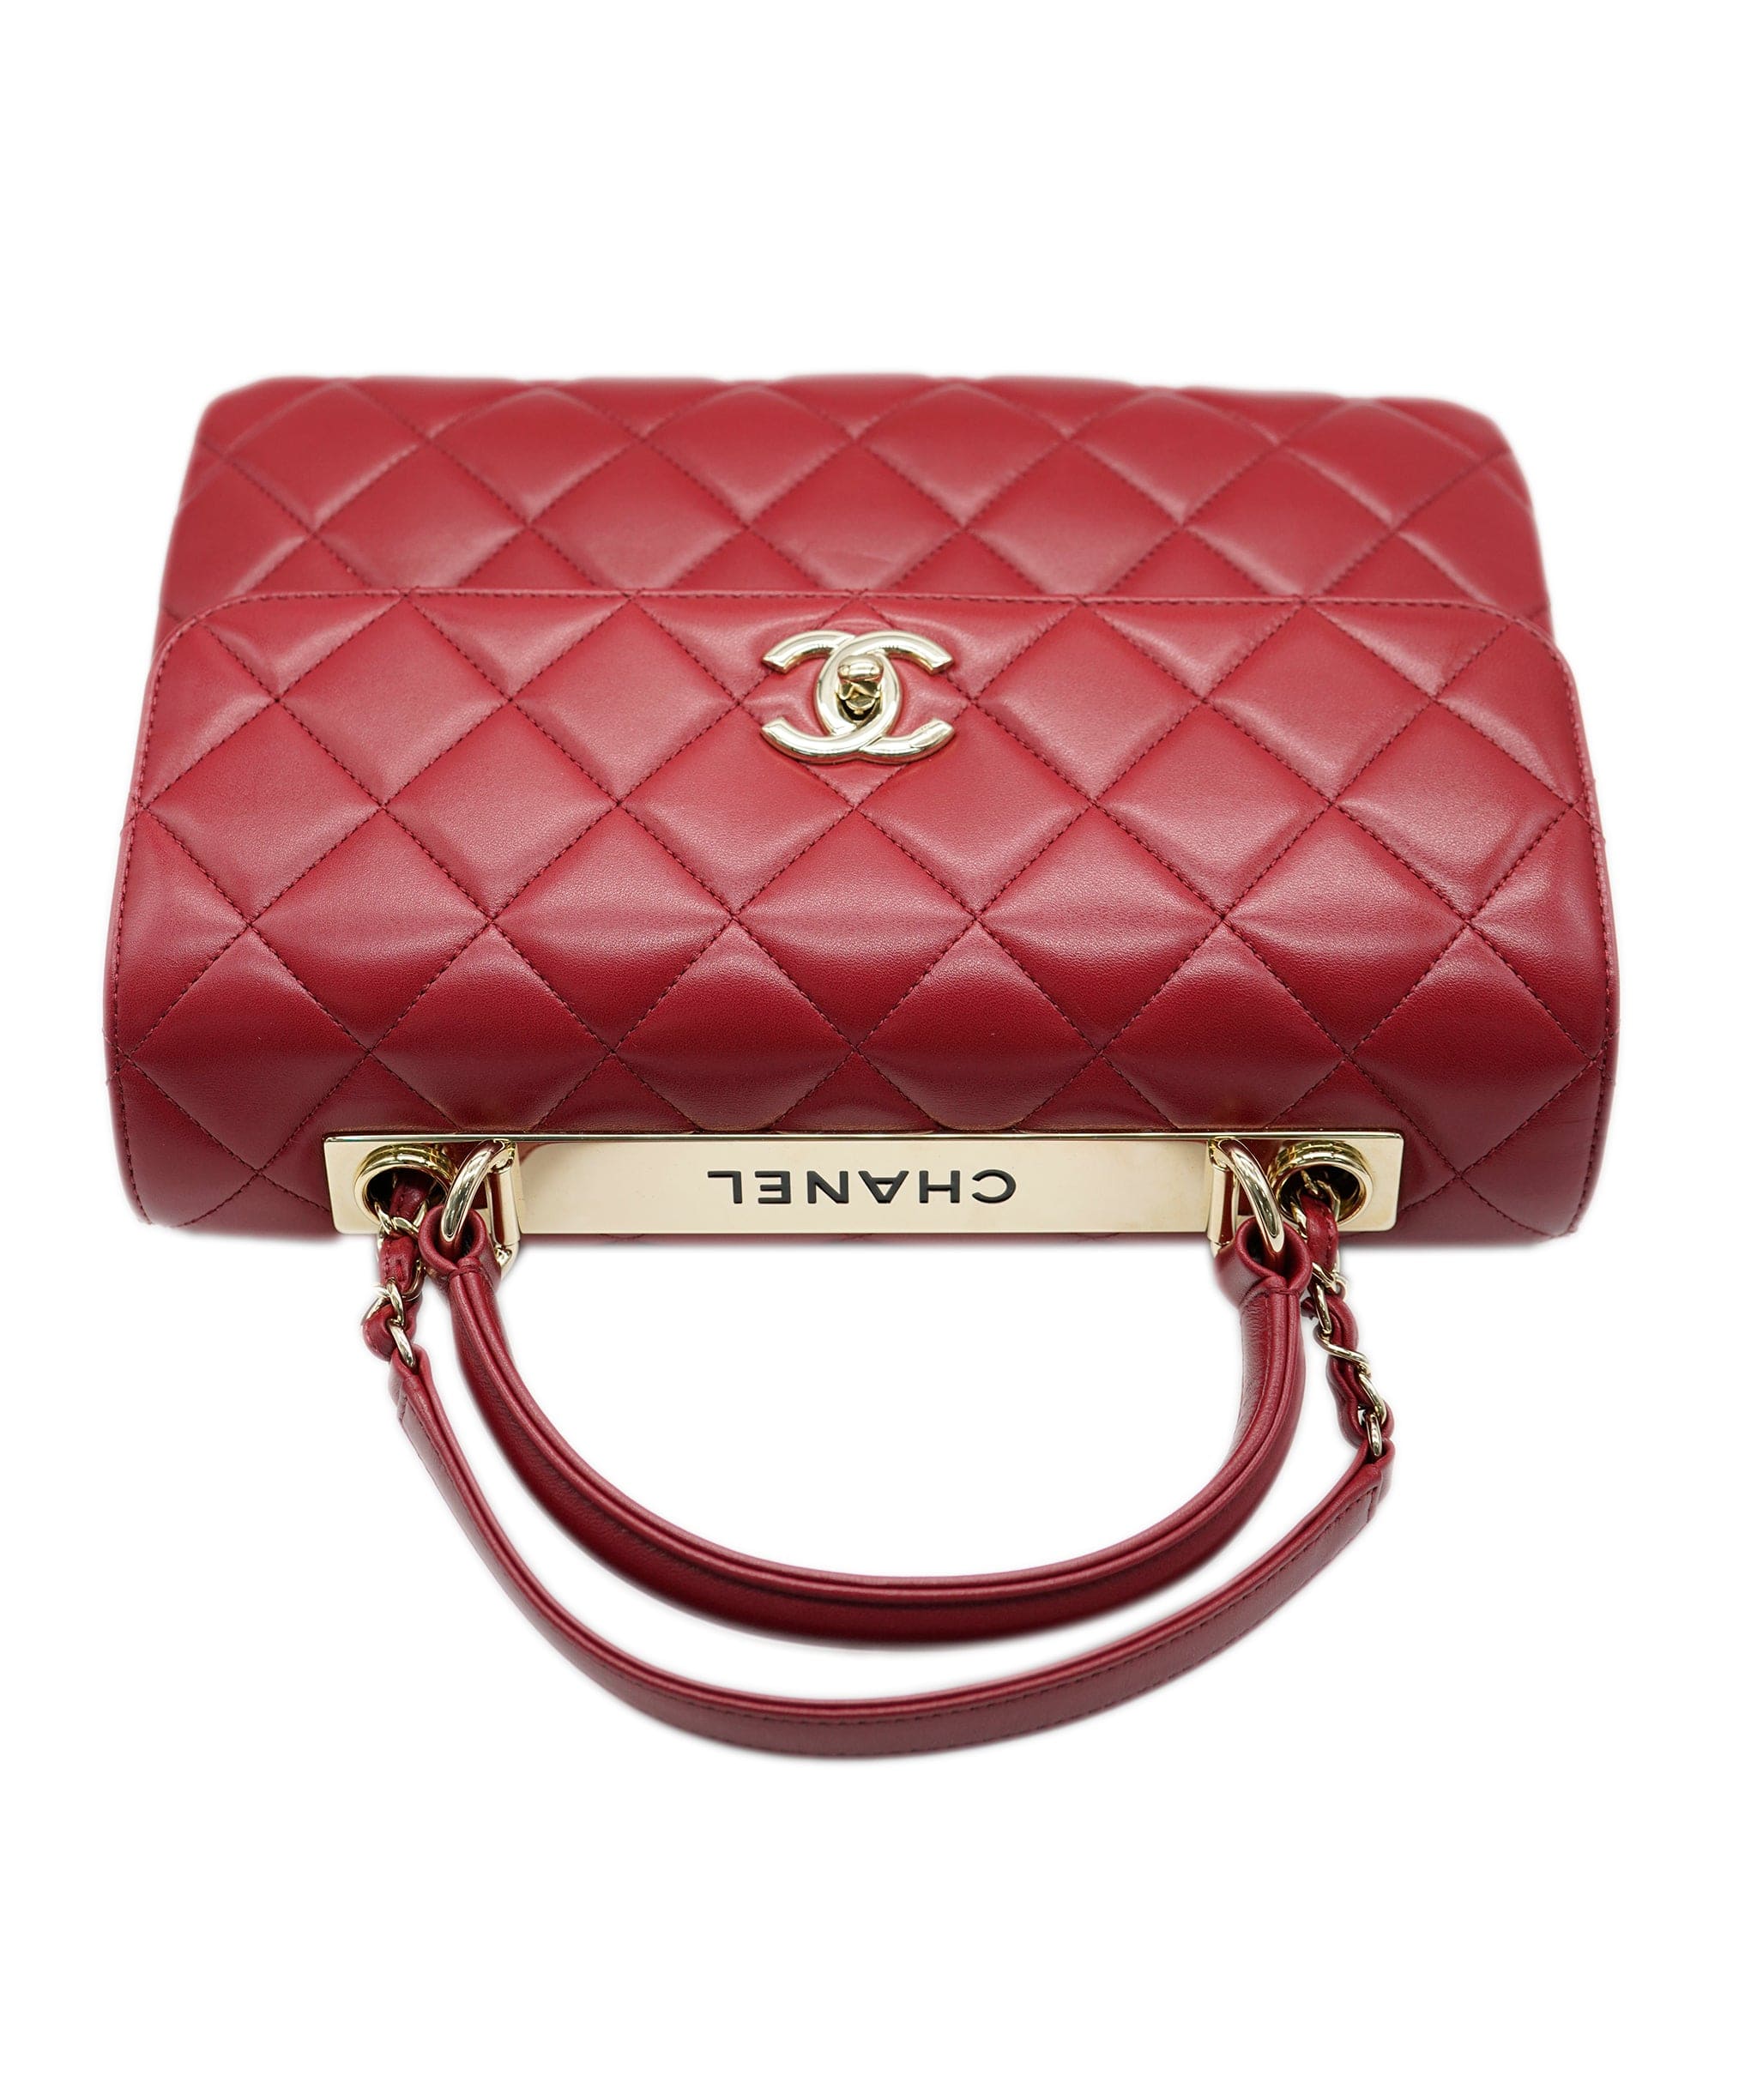 Chanel Chanel trendy large in cherry red GHW AGL2413